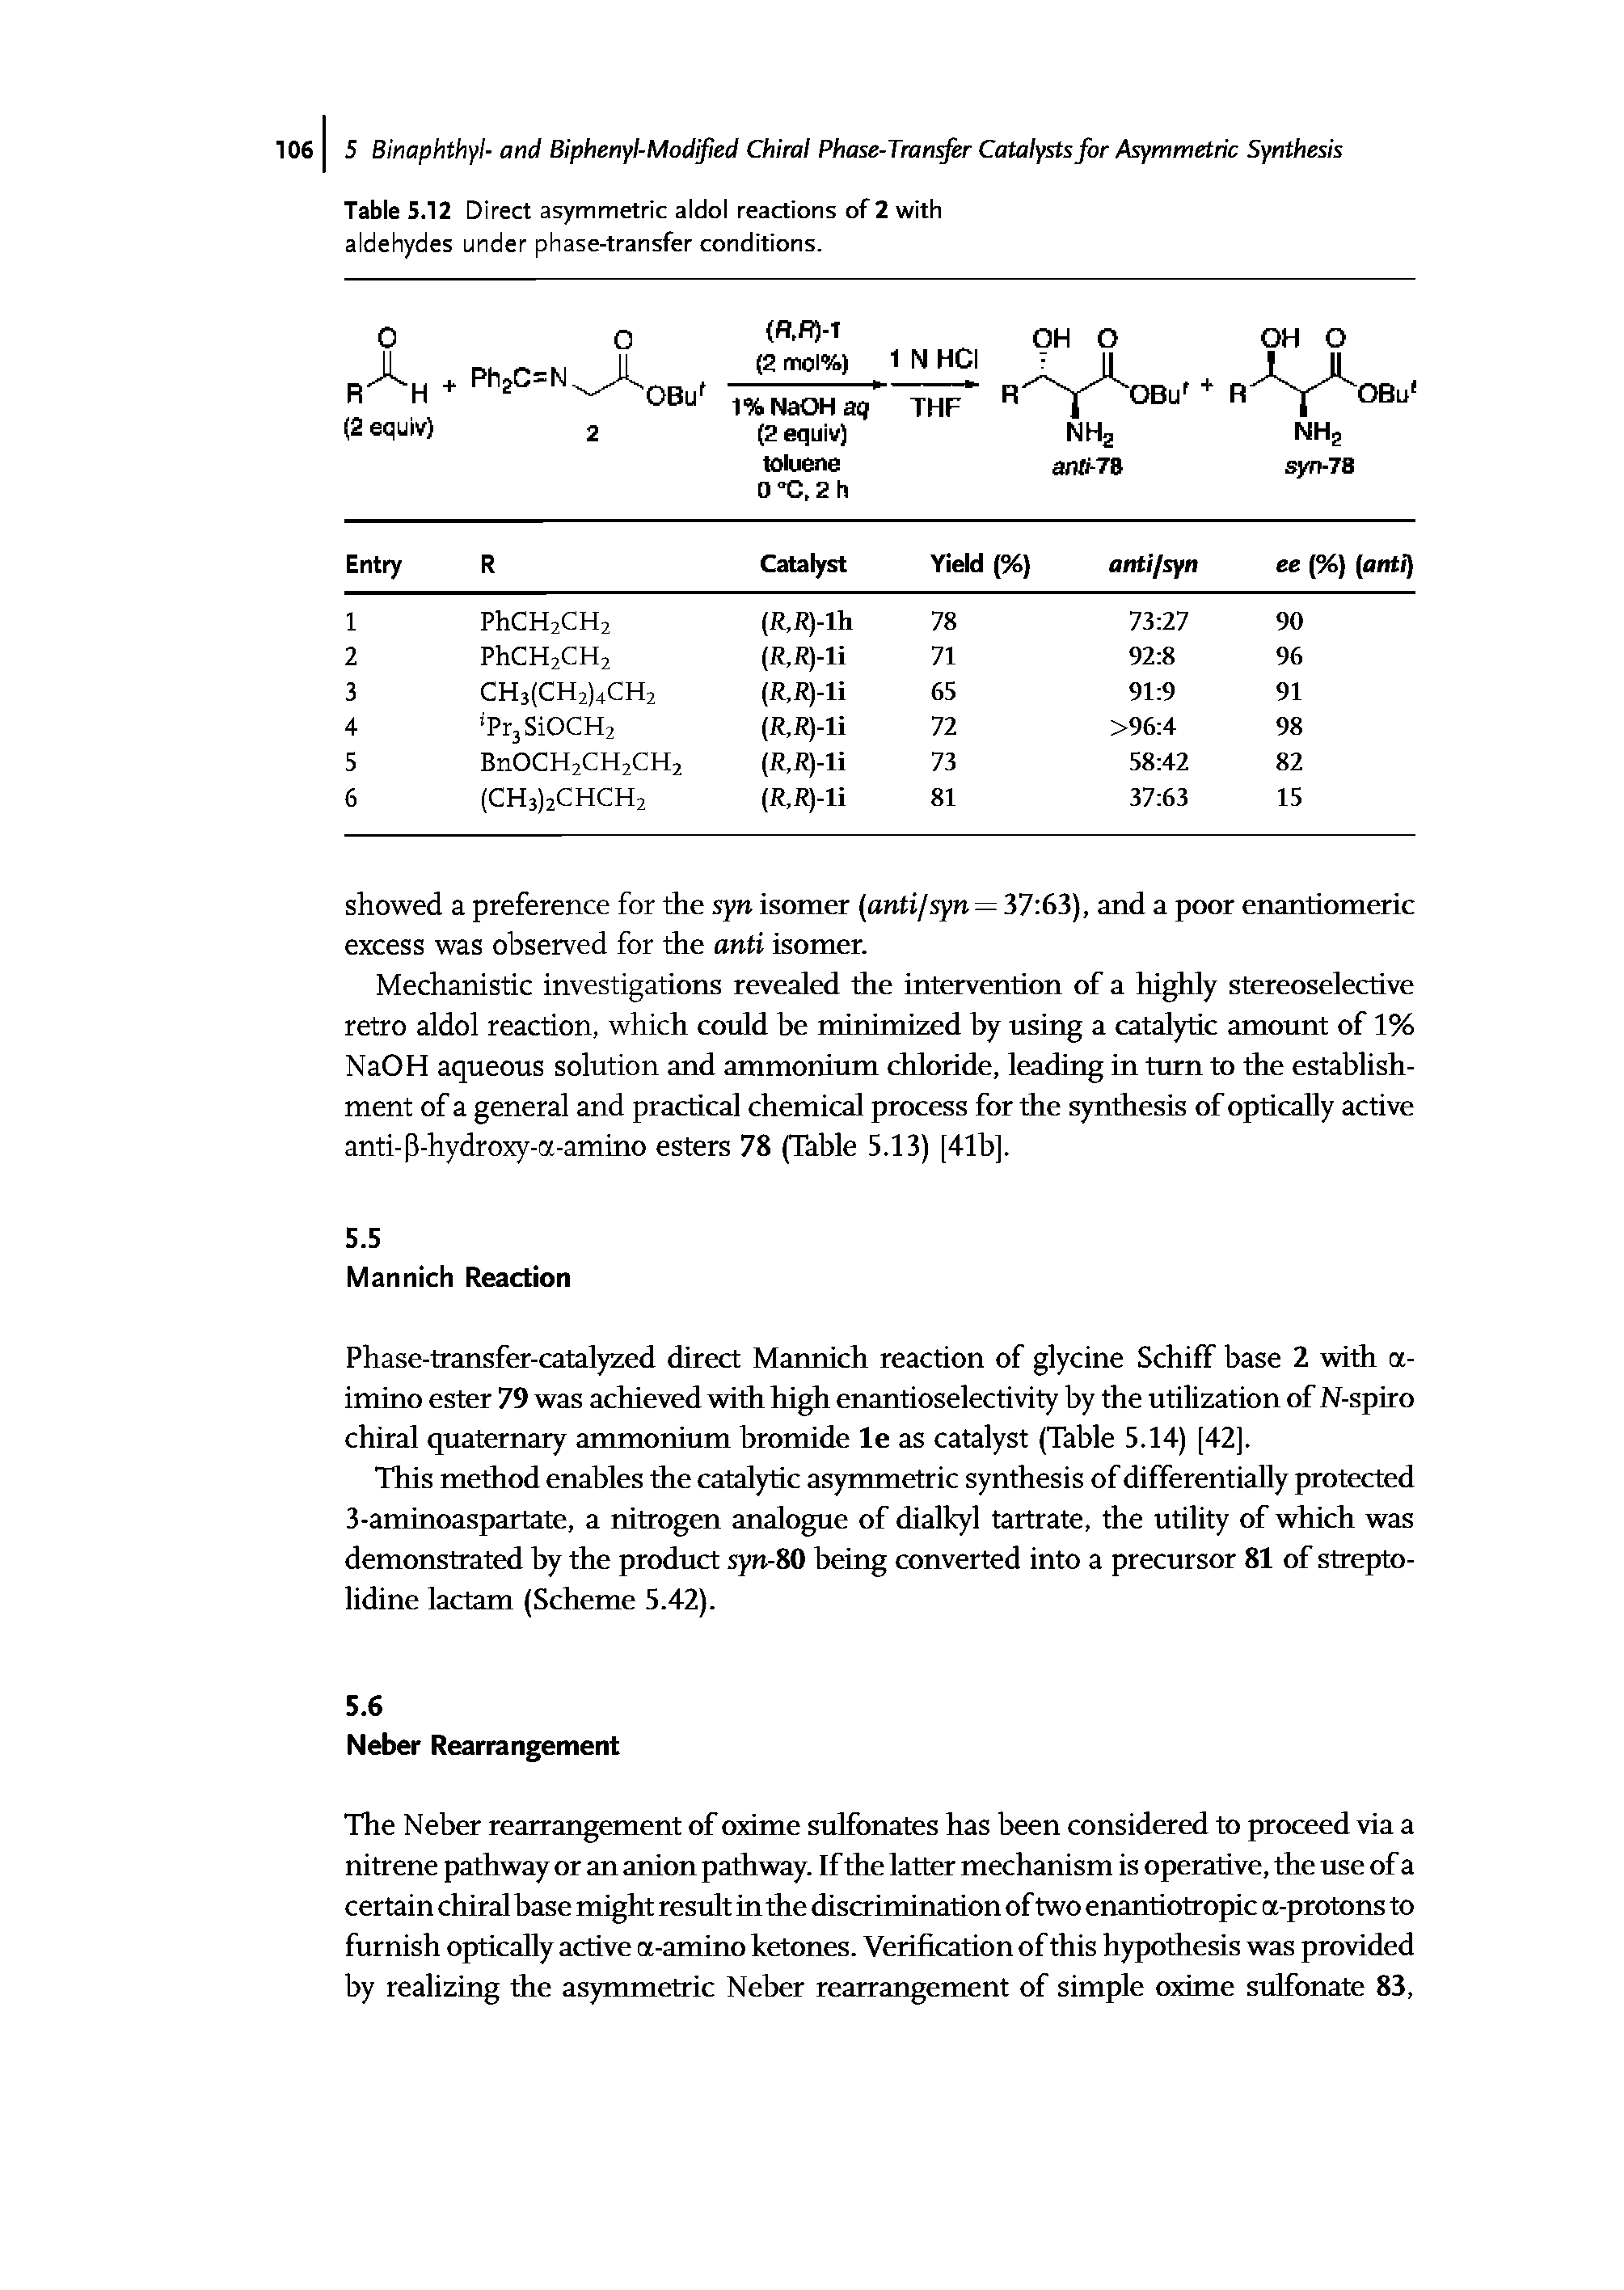 Table 5.12 Direct asymmetric aldol reactions of 2 with aldehydes under phase-transfer conditions.